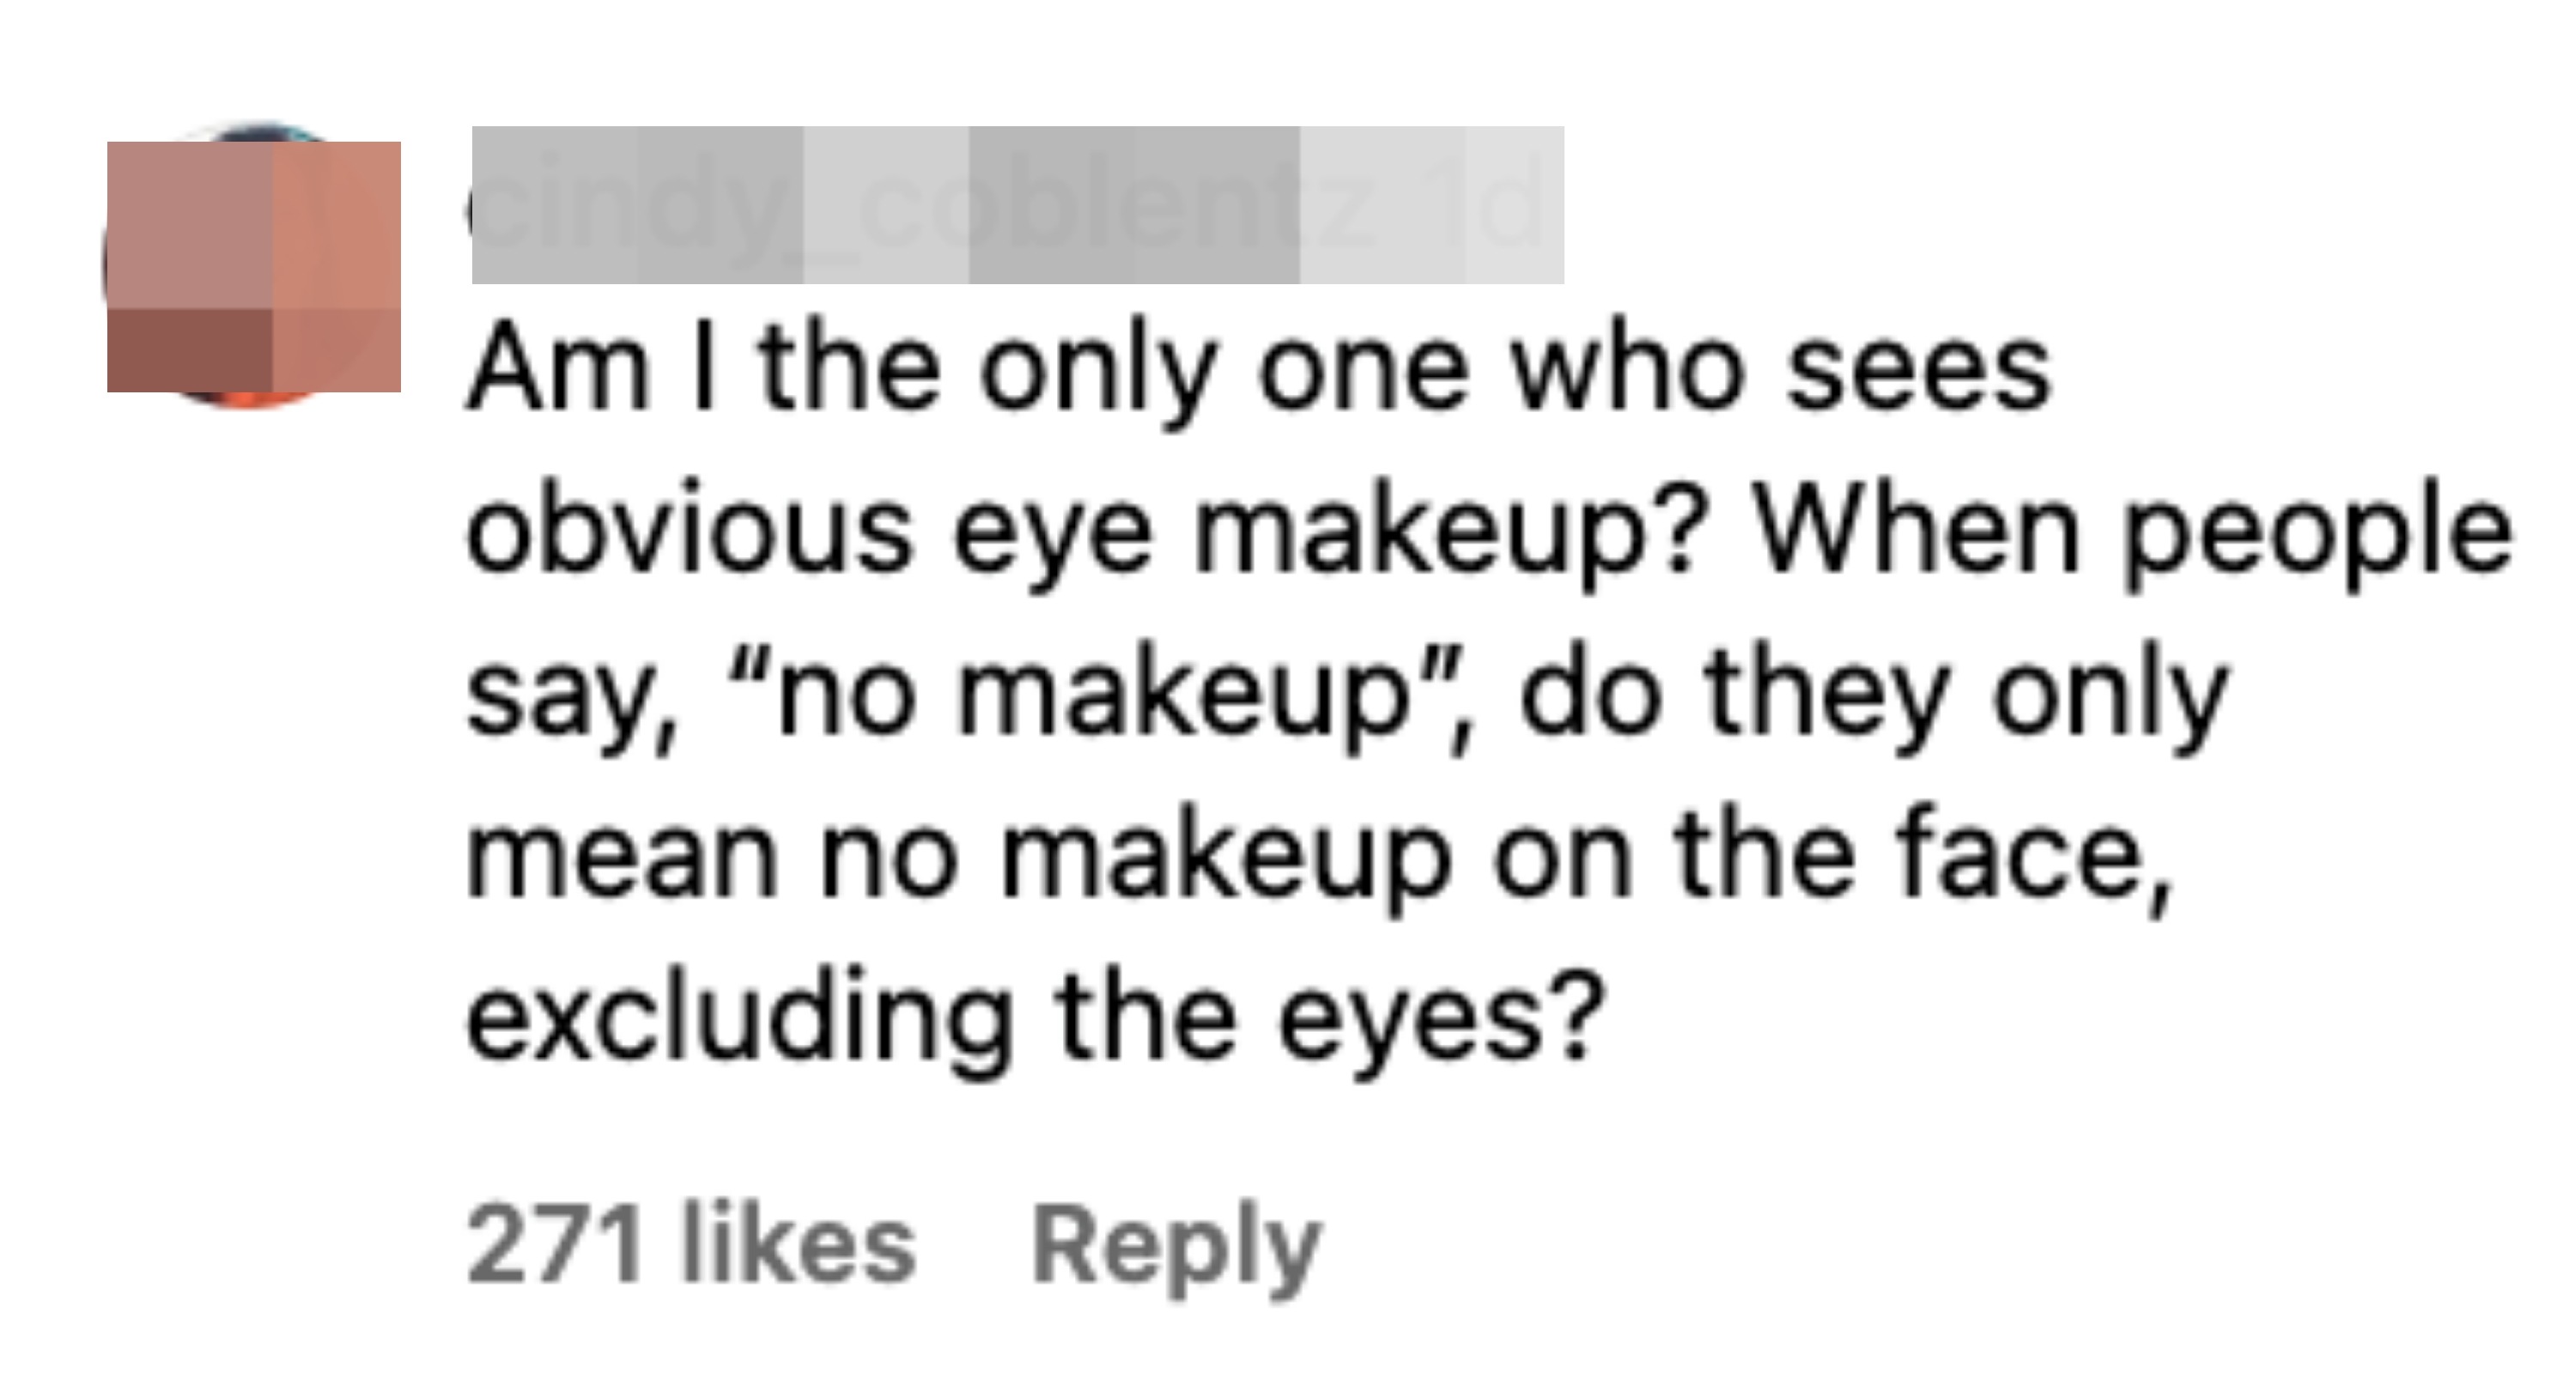 &quot;Am I the only one who sees obvious eye makeup?&quot;